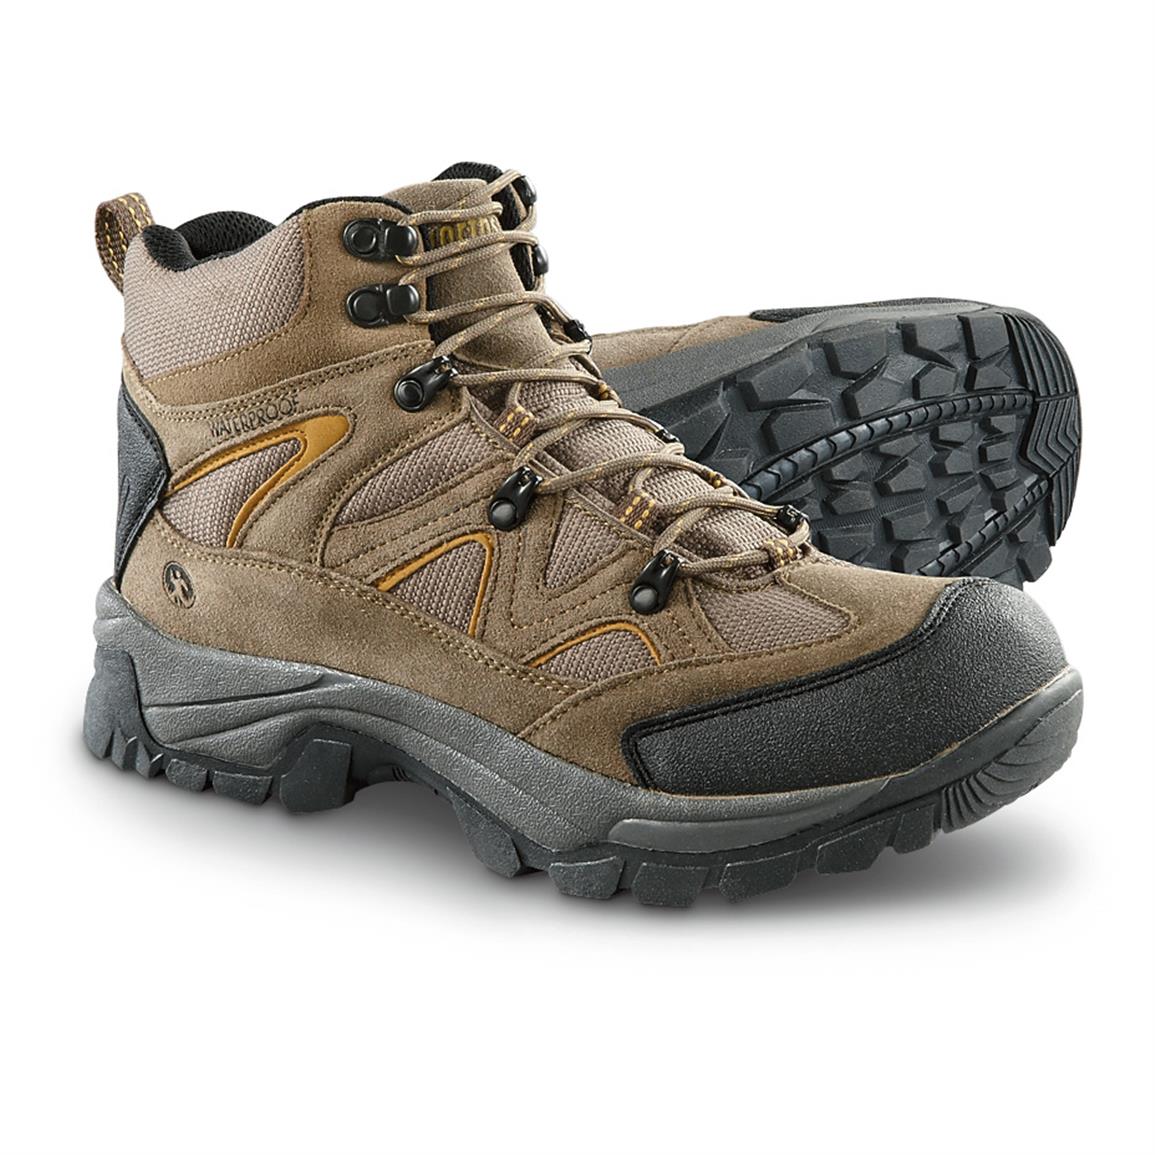 Northside Snohomish Waterproof Mid Hiking Boots - 622035, Hiking Boots